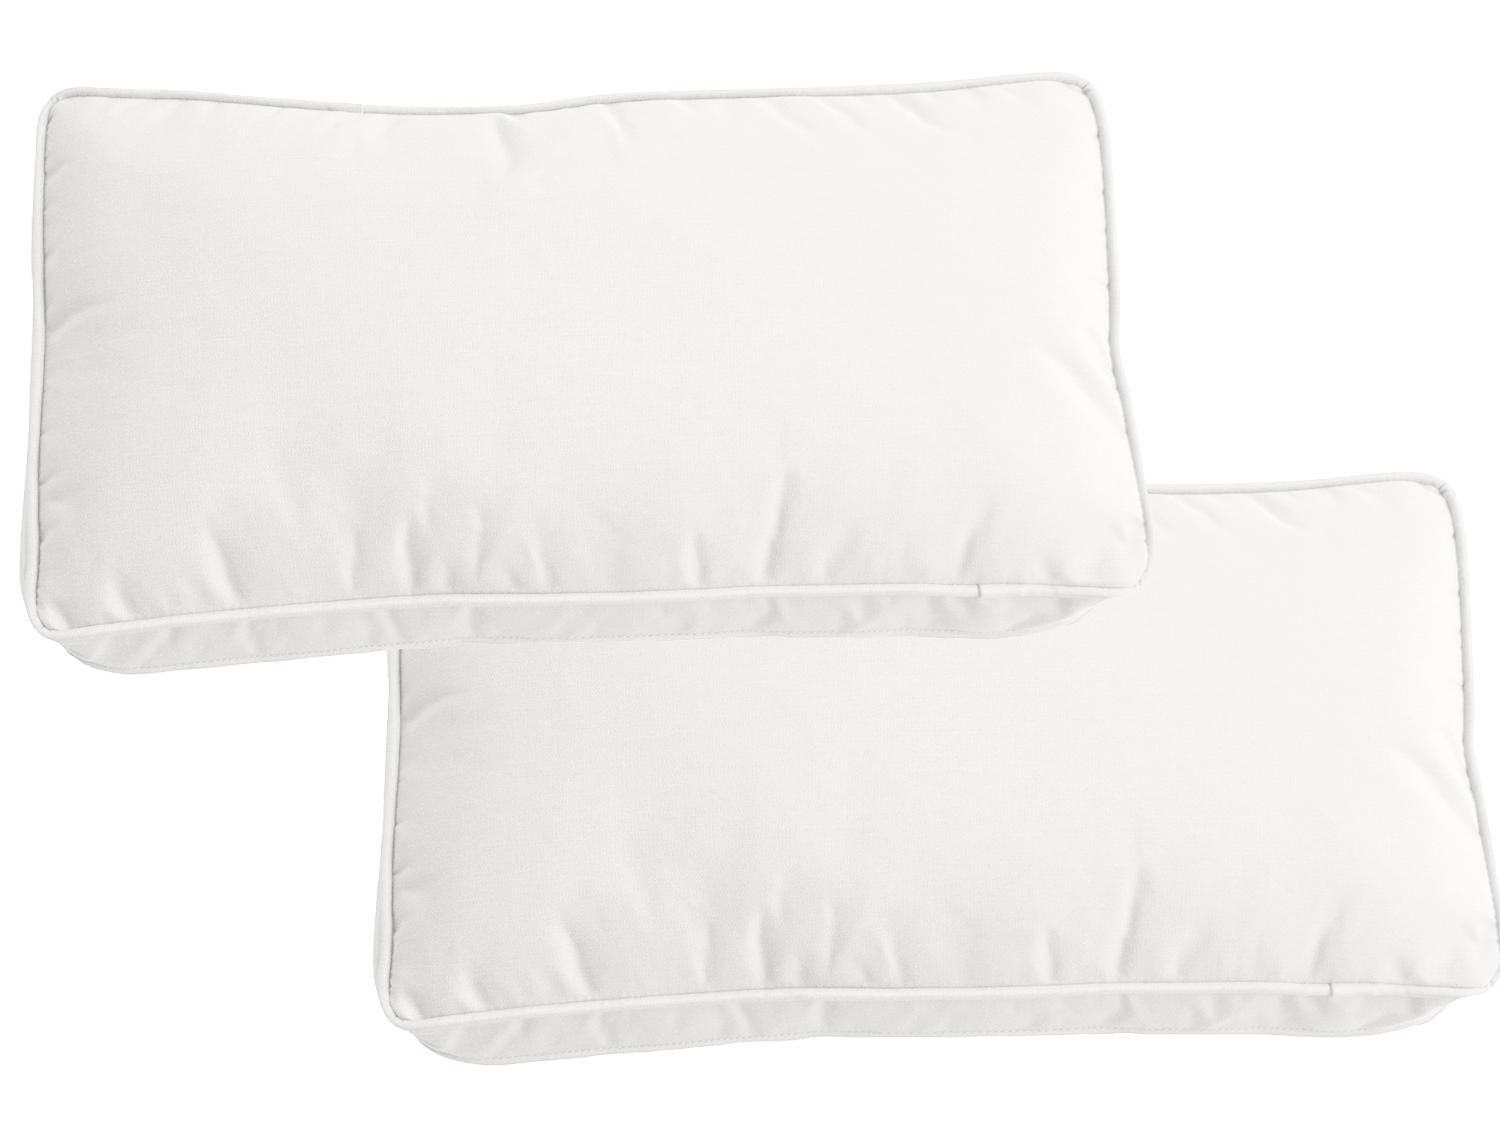 Alexander Francis Garden Furniture Milano Set of 6 White Scatter Cushions